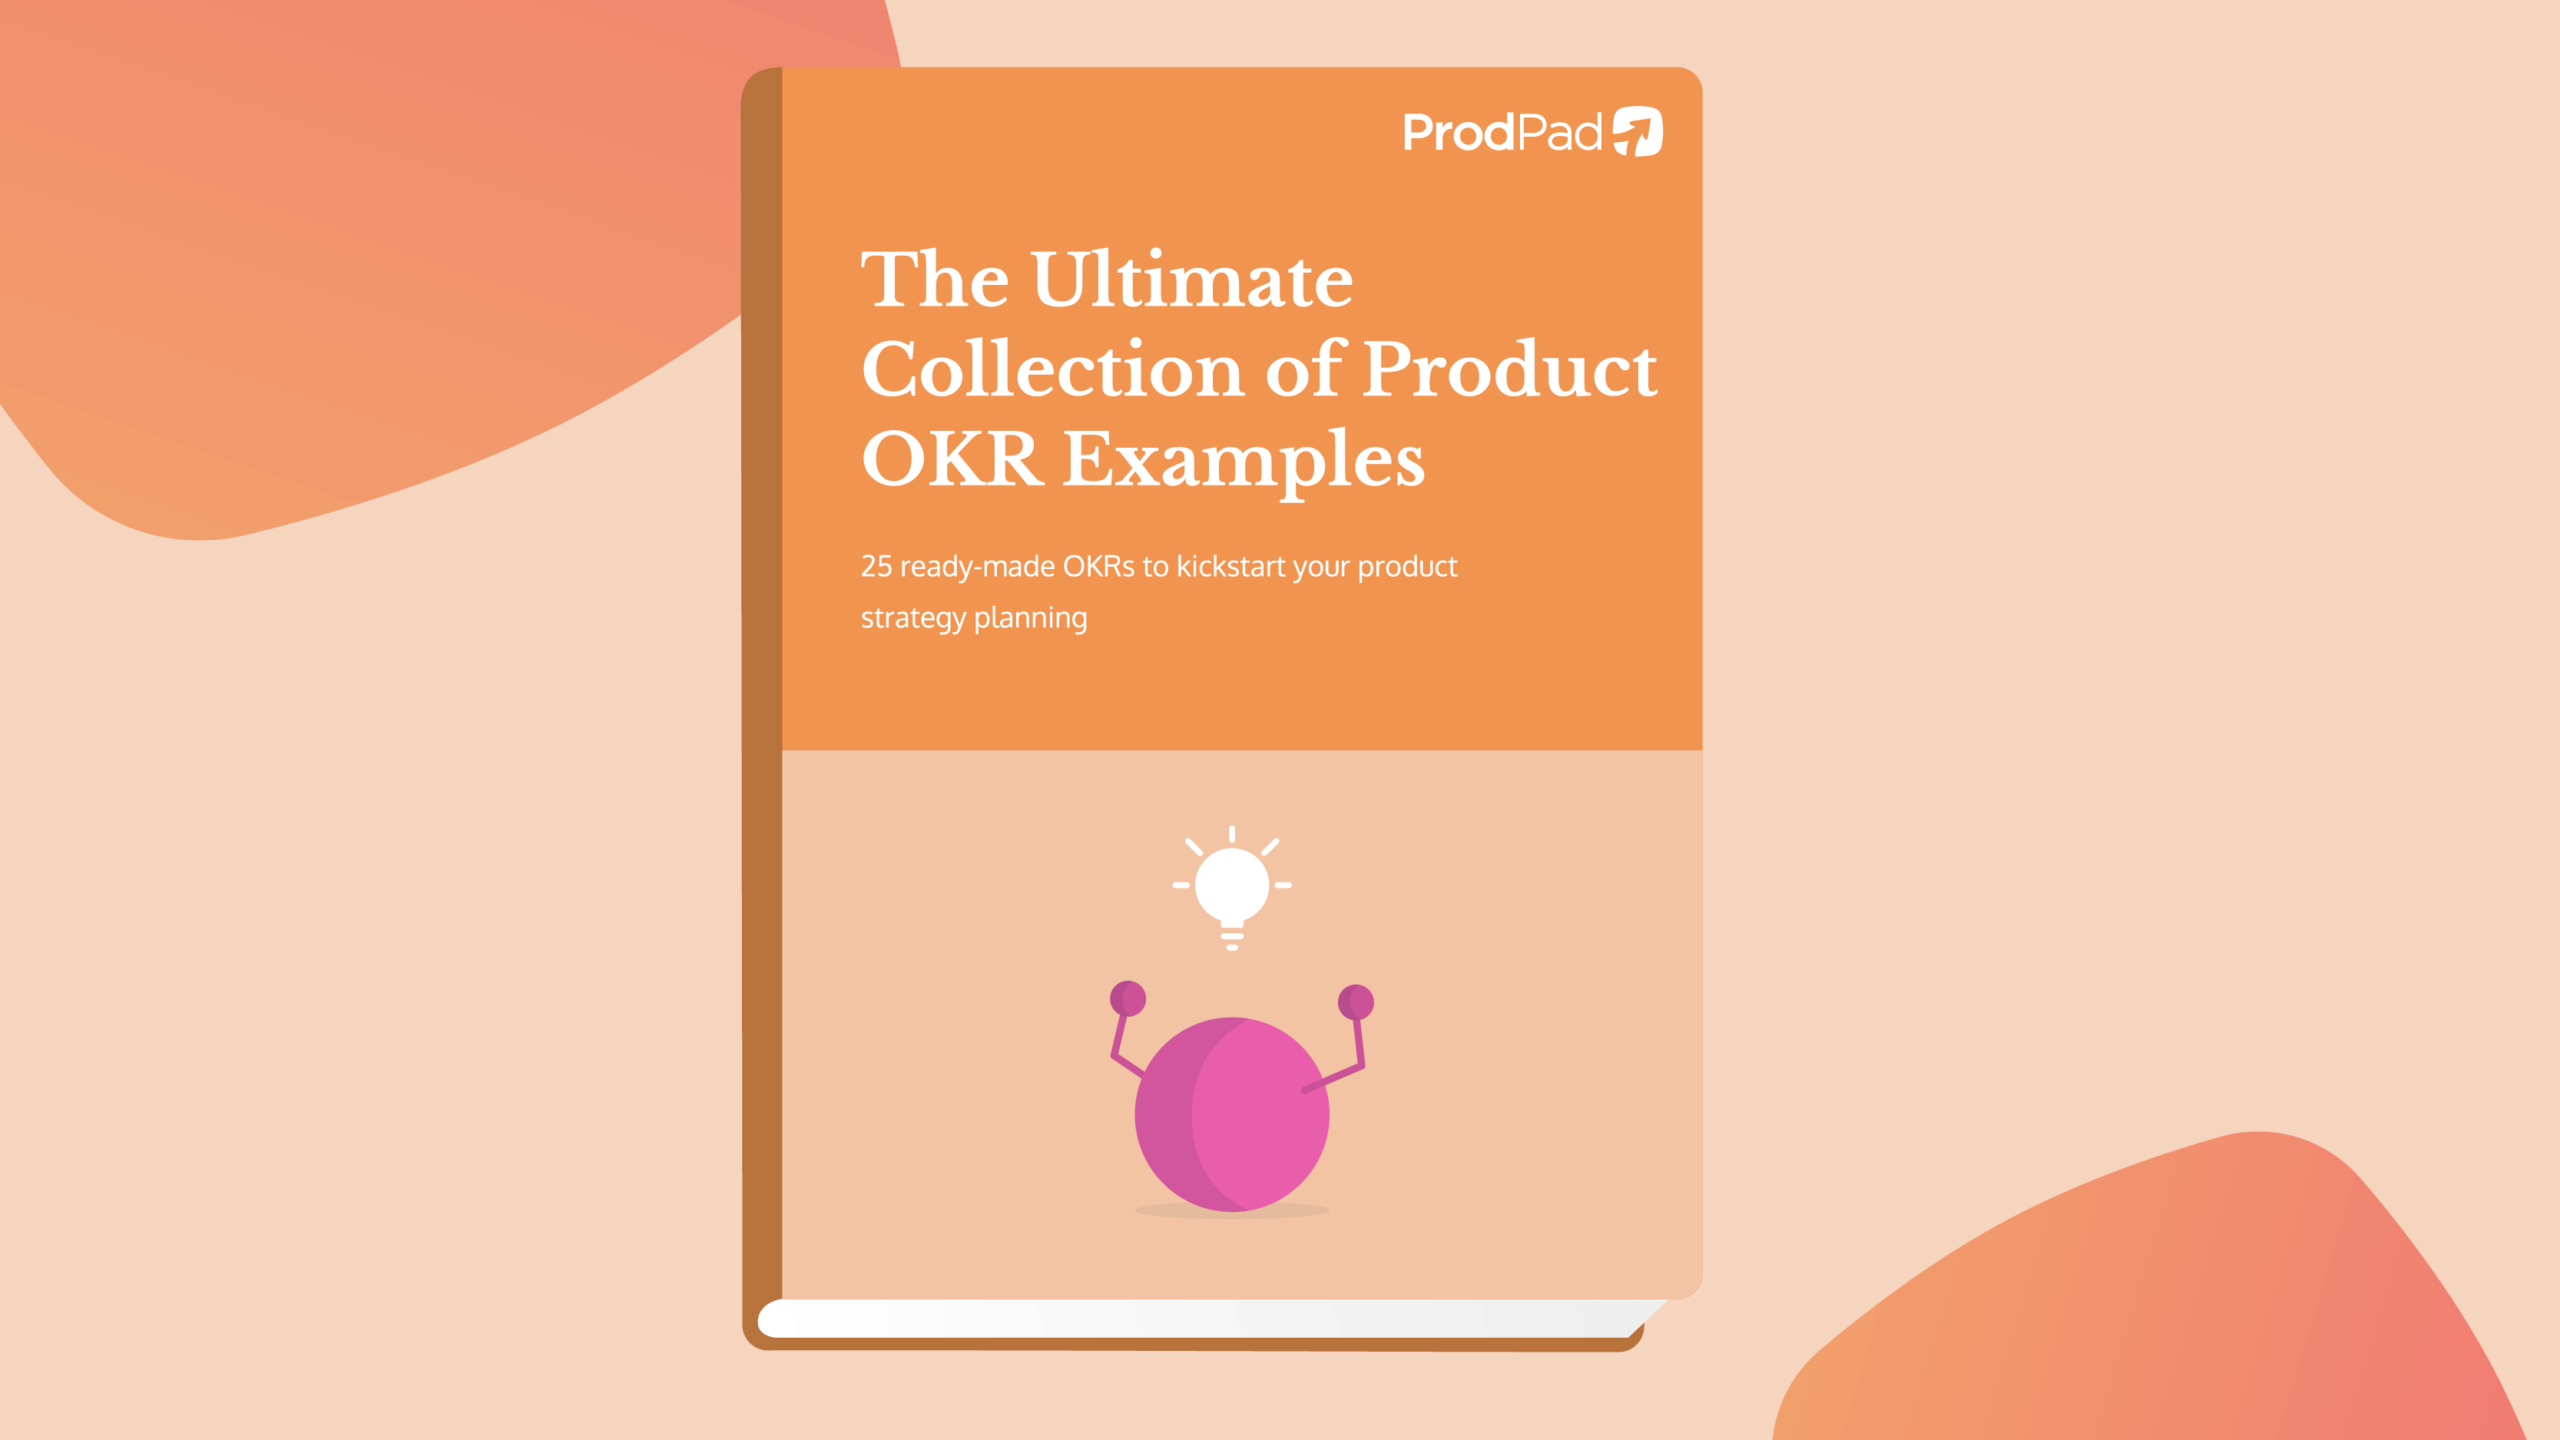 The Ultimate Collection of Product OKR Examples ebook from ProdPad product management software